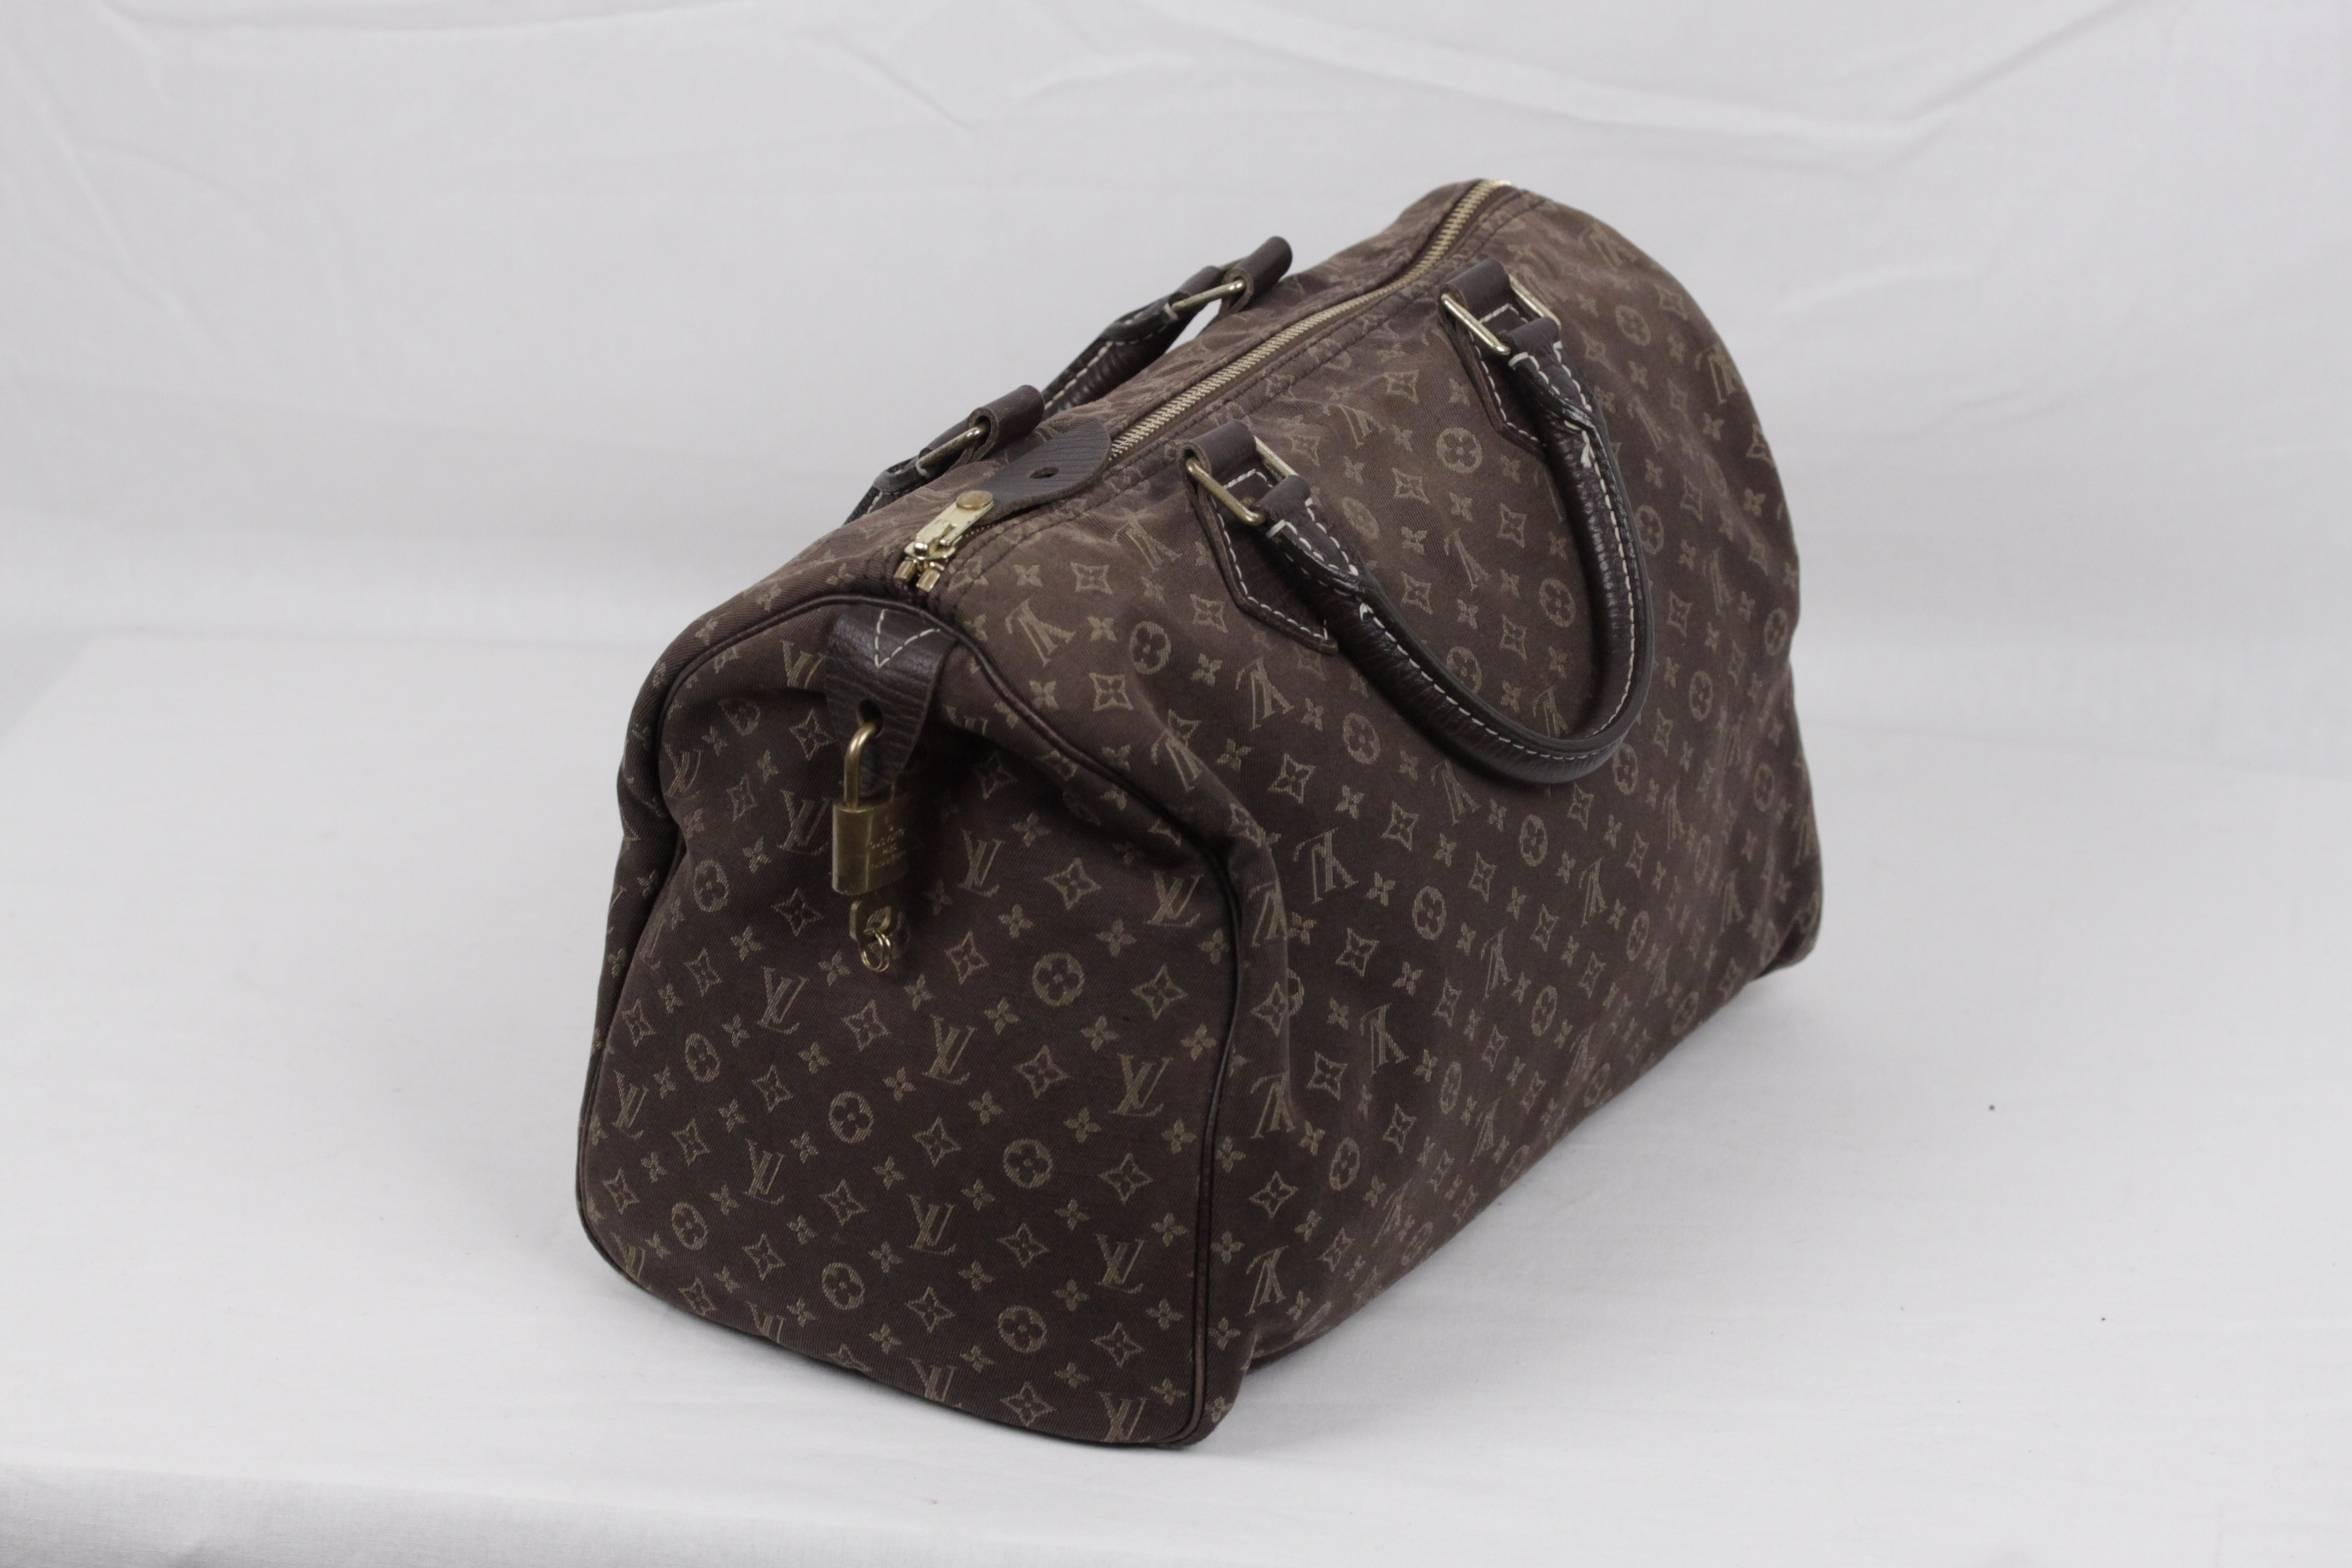  Brand: LOUIS VUITTON Paris - Made in France

Logos / Tags: LV - LOUIS VUITTON monograms on canvas ,'LOUIS VUITTON Paris - Made in France' was engraved on leather piece on a side (Now unreadable, due to normal use), signed hardware, serial number